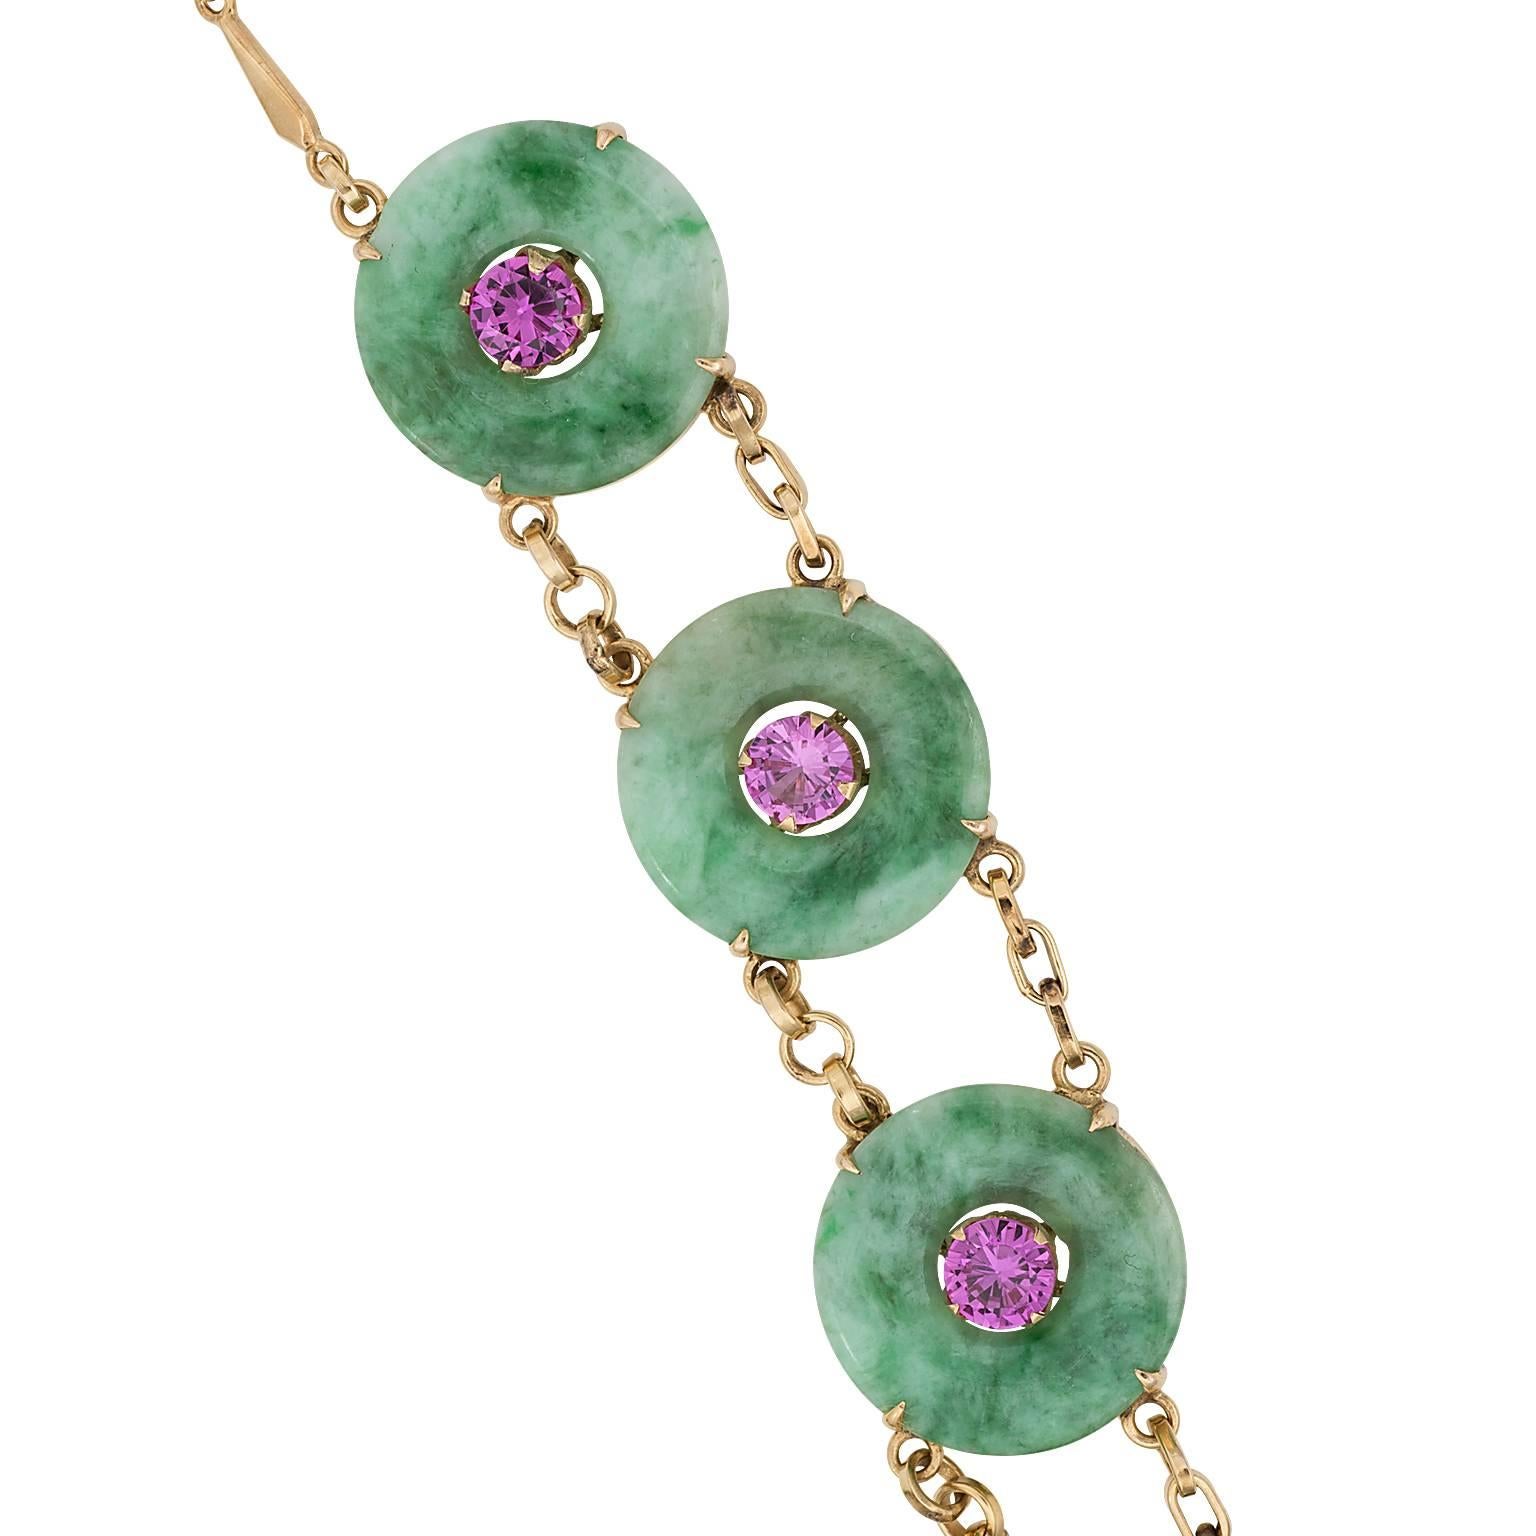 Jade and pink tourmaline 22 karat gold necklace.  The necklace is made up of ten carved jade discs with a round cut pink tourmaline in the center of each.  The discs are linked by a double linked chain.

Length:  18.50 inches  